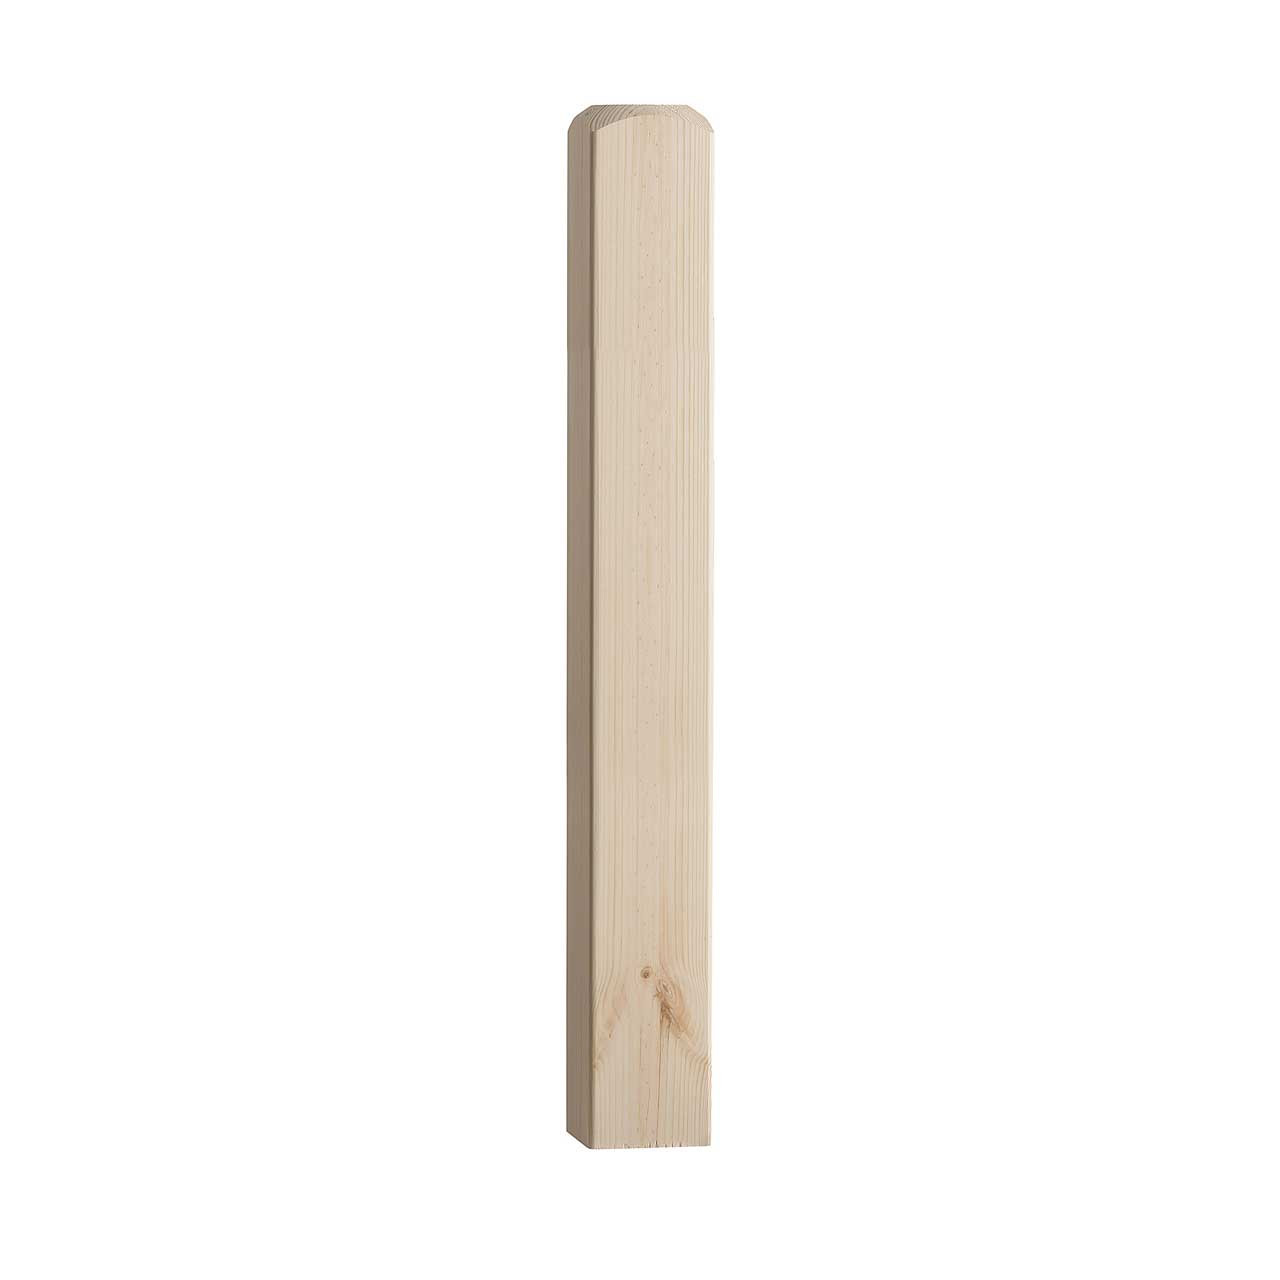 Photograph of Cheshire Mouldings 90mm x 915mm Pine Newel Base